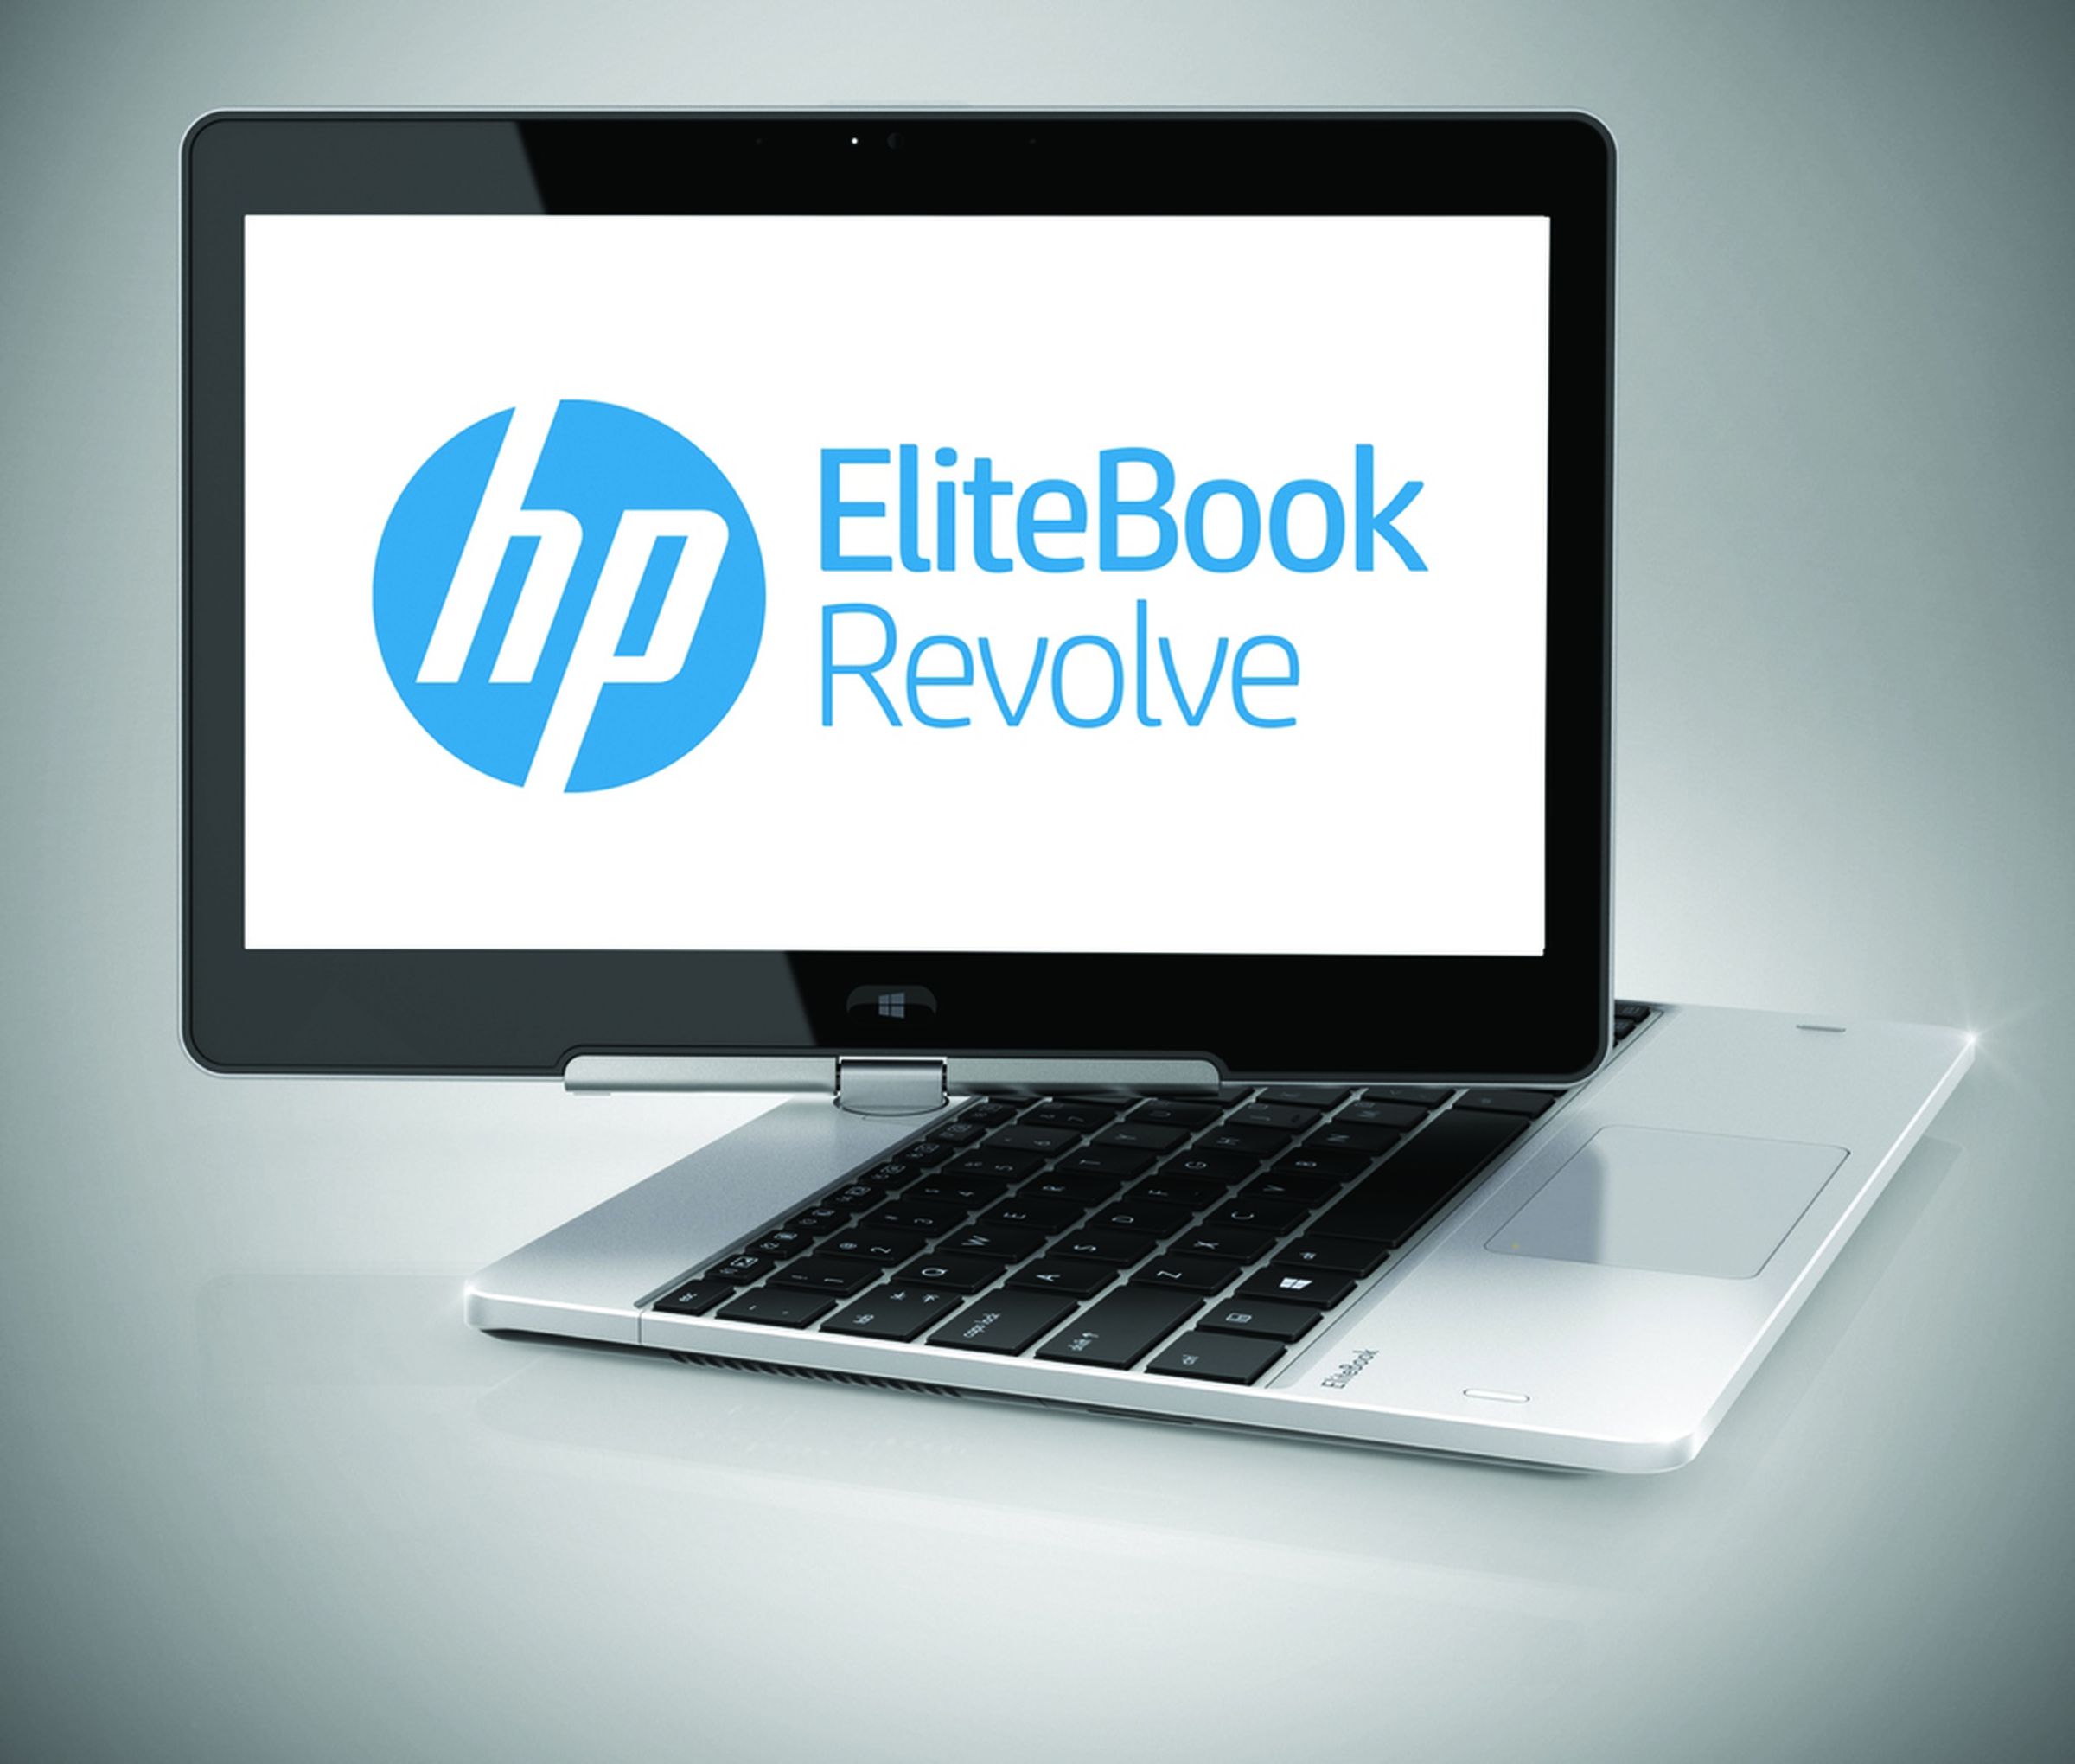 HP Elitebook Revolve hands-on and press pictures